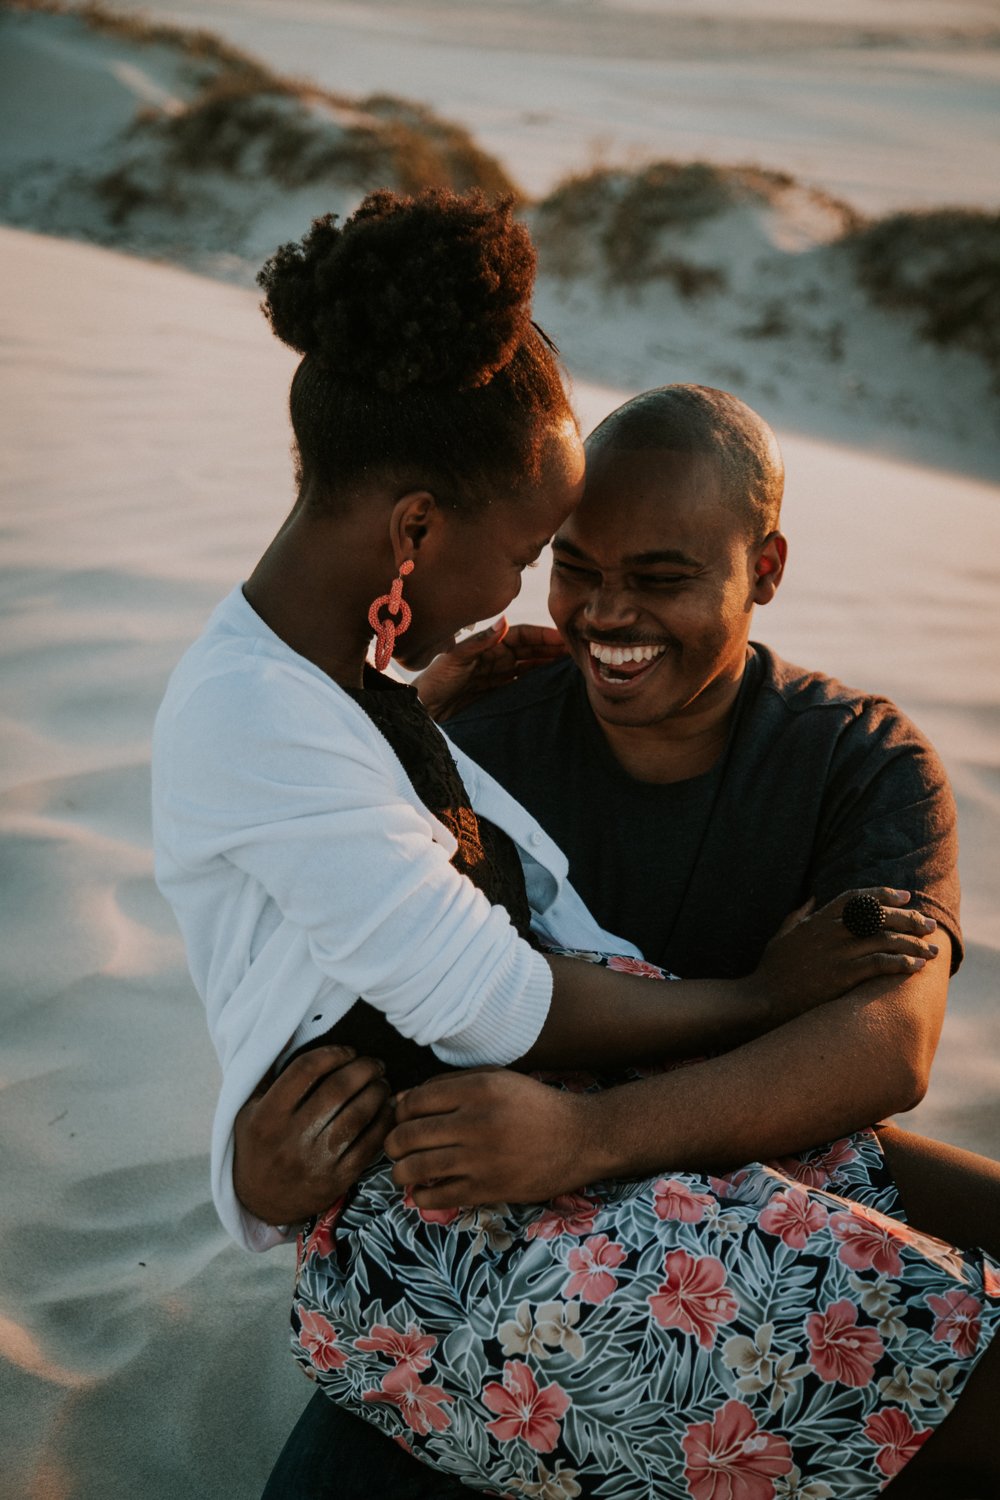 Susnet Beach Engagement Photoshoot in Cape Town - Bianca Asher Photography-16.jpg